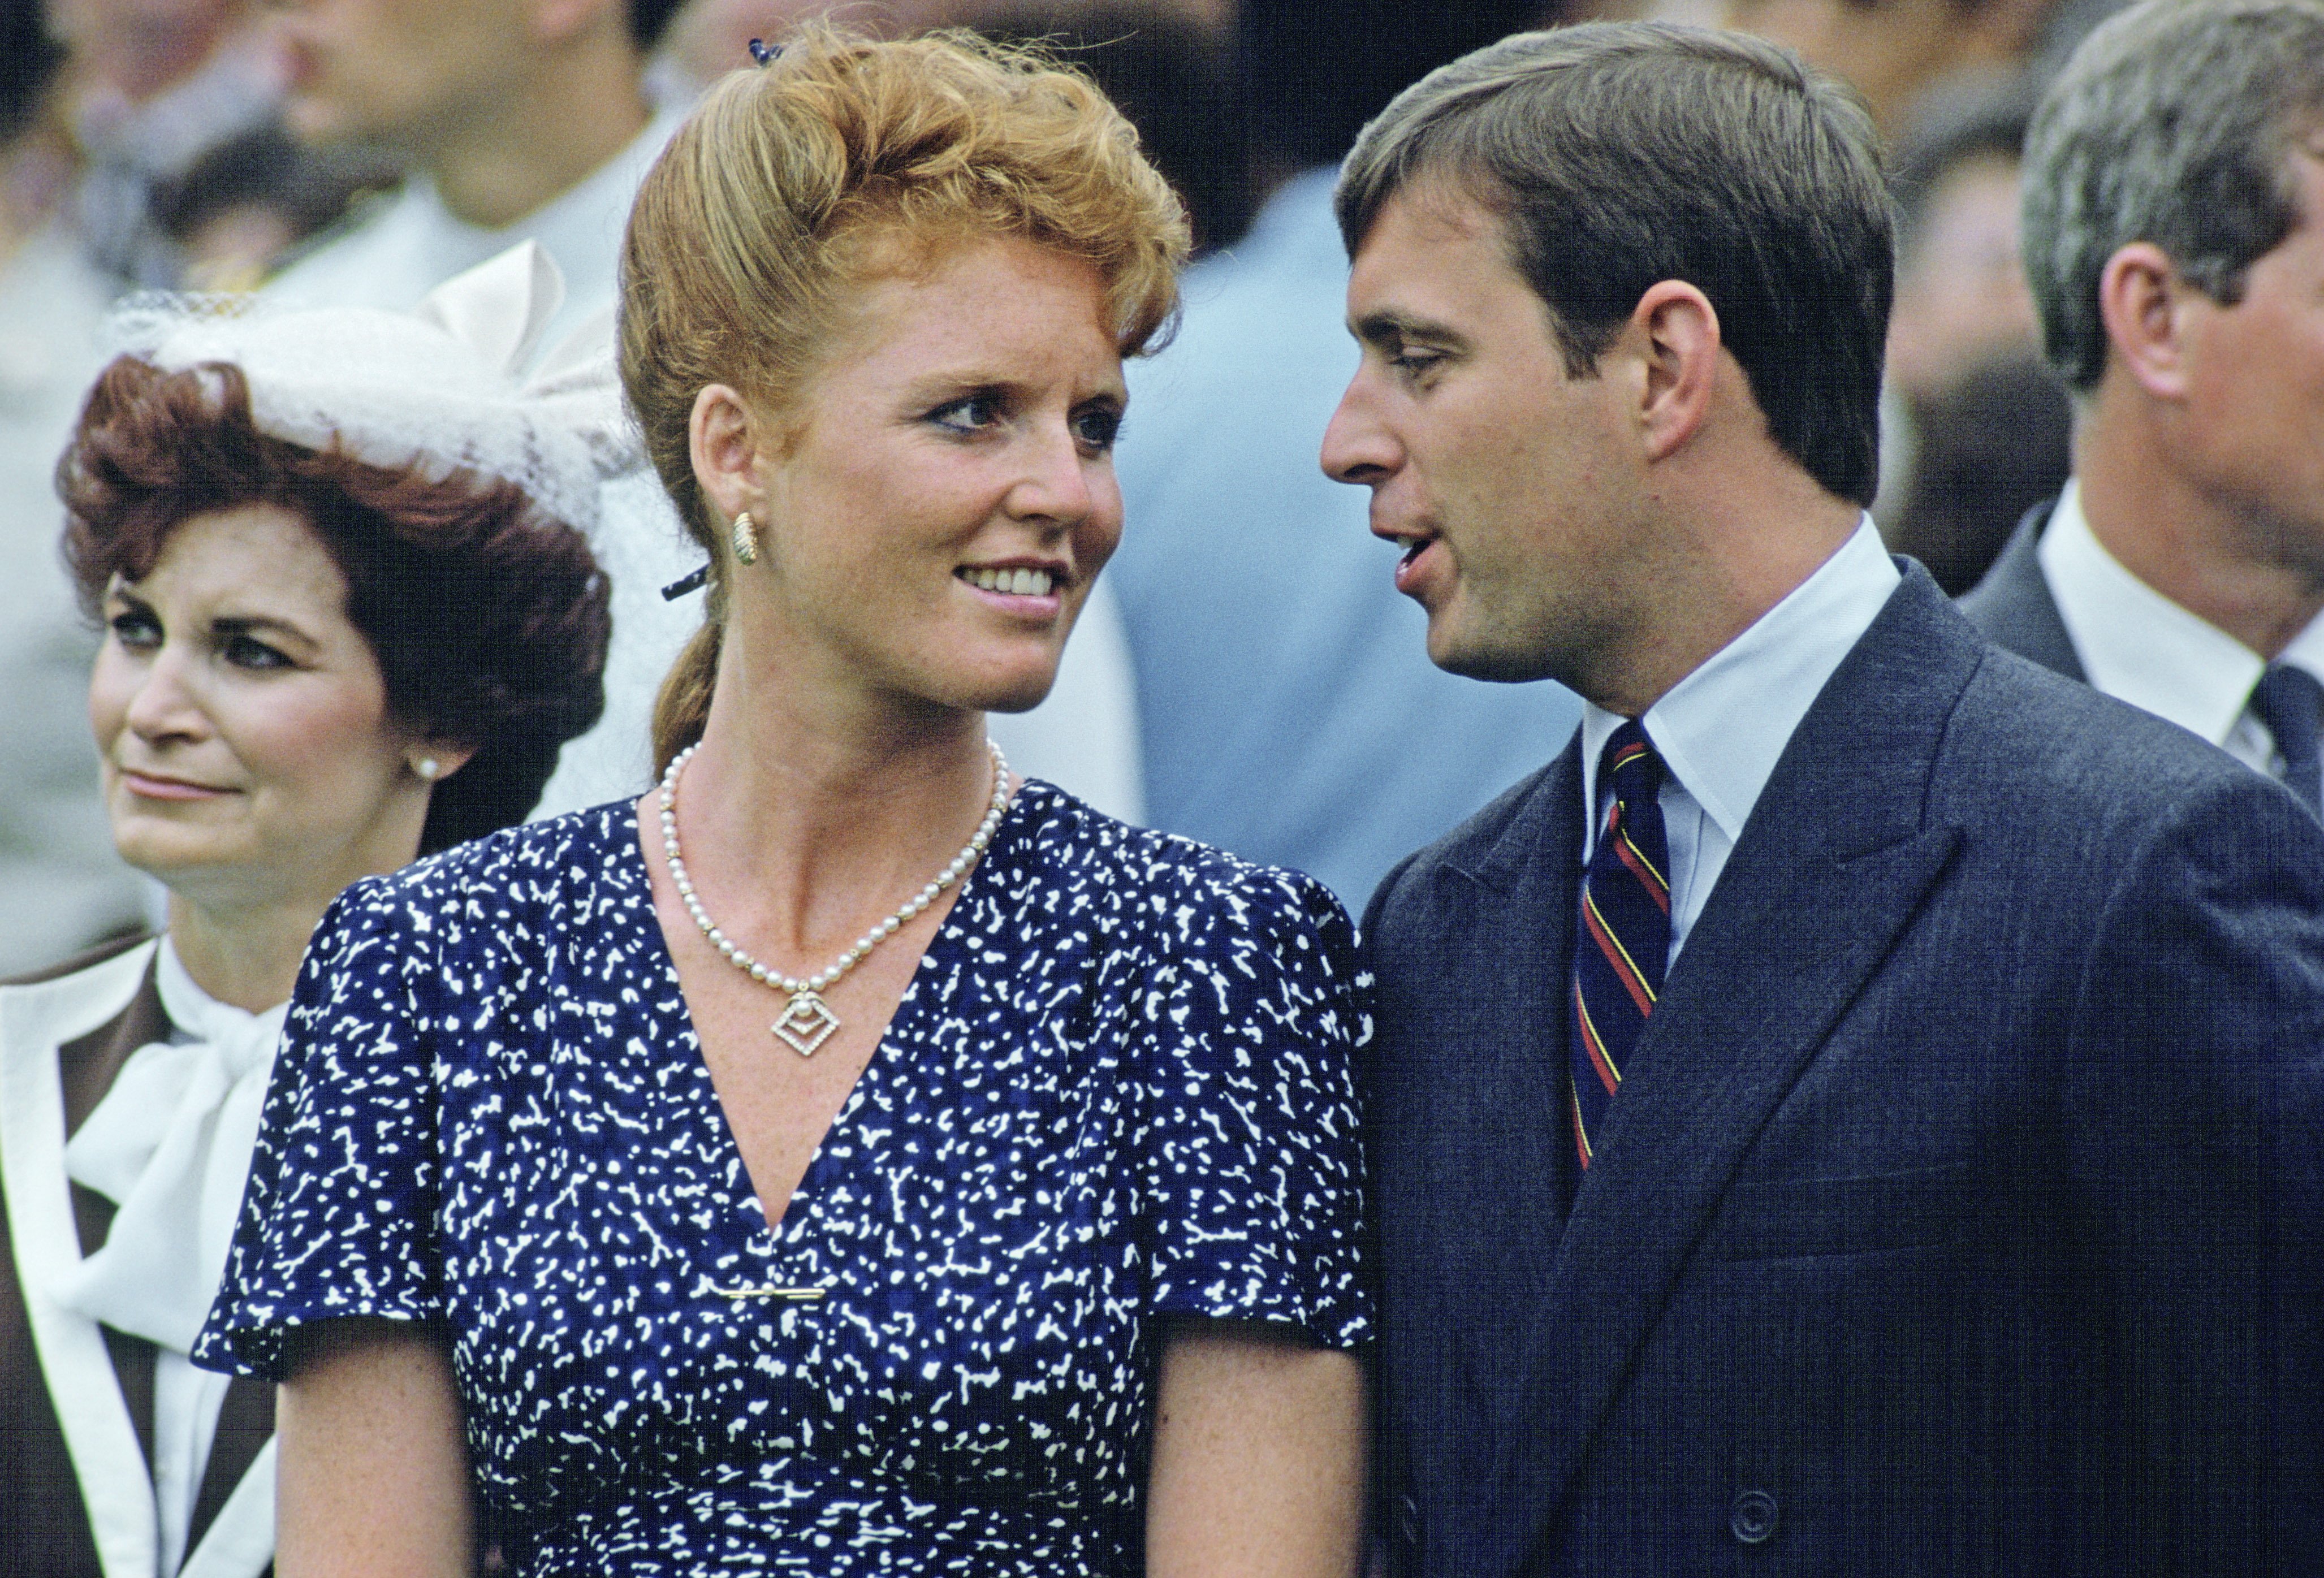  The Duke And Duchess Of York During A Visit To Winnipeg In Canada. | Source: Getty Images